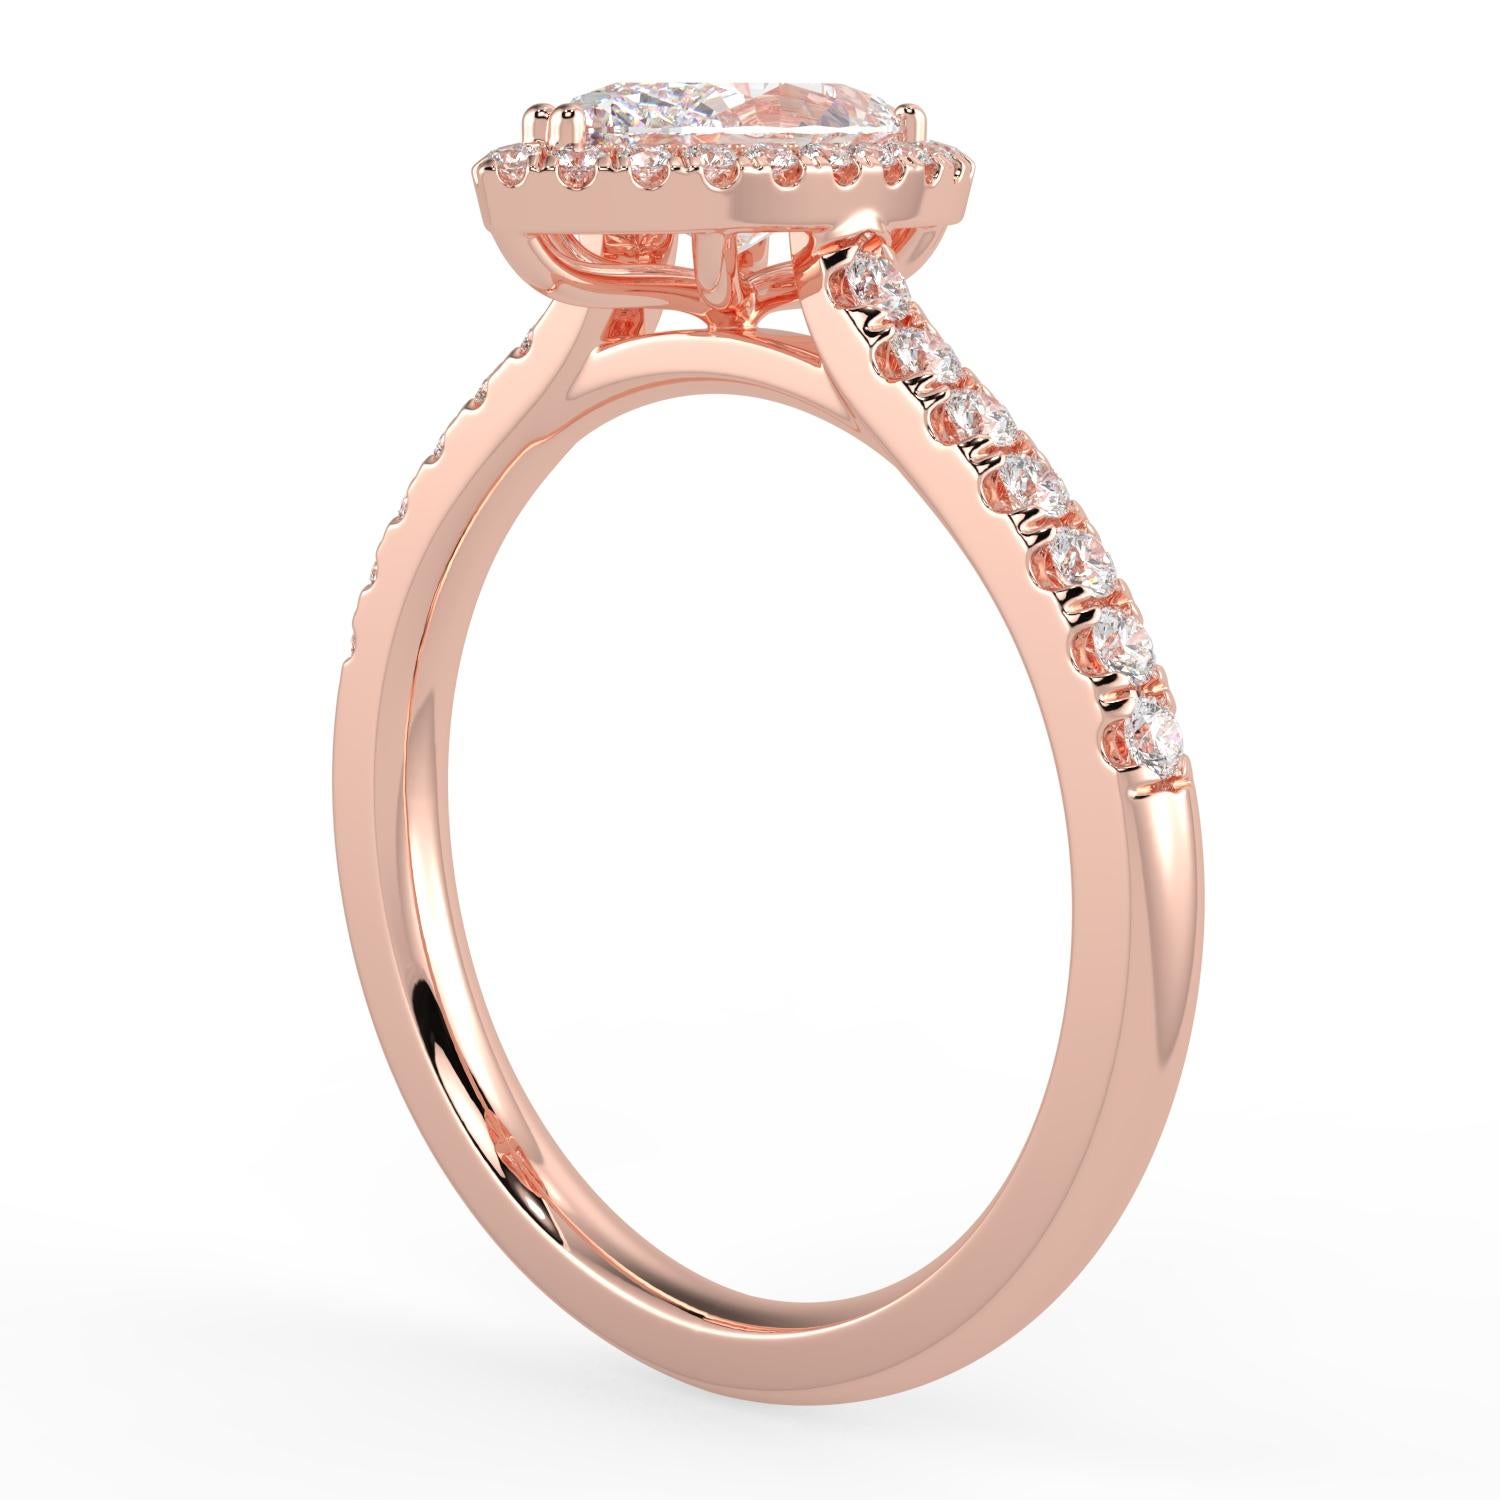 Aamiaa DIAMOND RING
1ct Natural Diamond G-H Color SI Clarity Perfect Design Shape Halo Fashion Stunning Promise Ring 14K Rose Gold
Specification:
Brand: Aamiaa
Metal: Rose Gold
Metal Purity: 14k
Center Diamond Shape: Marquise
Design: Halo
Center